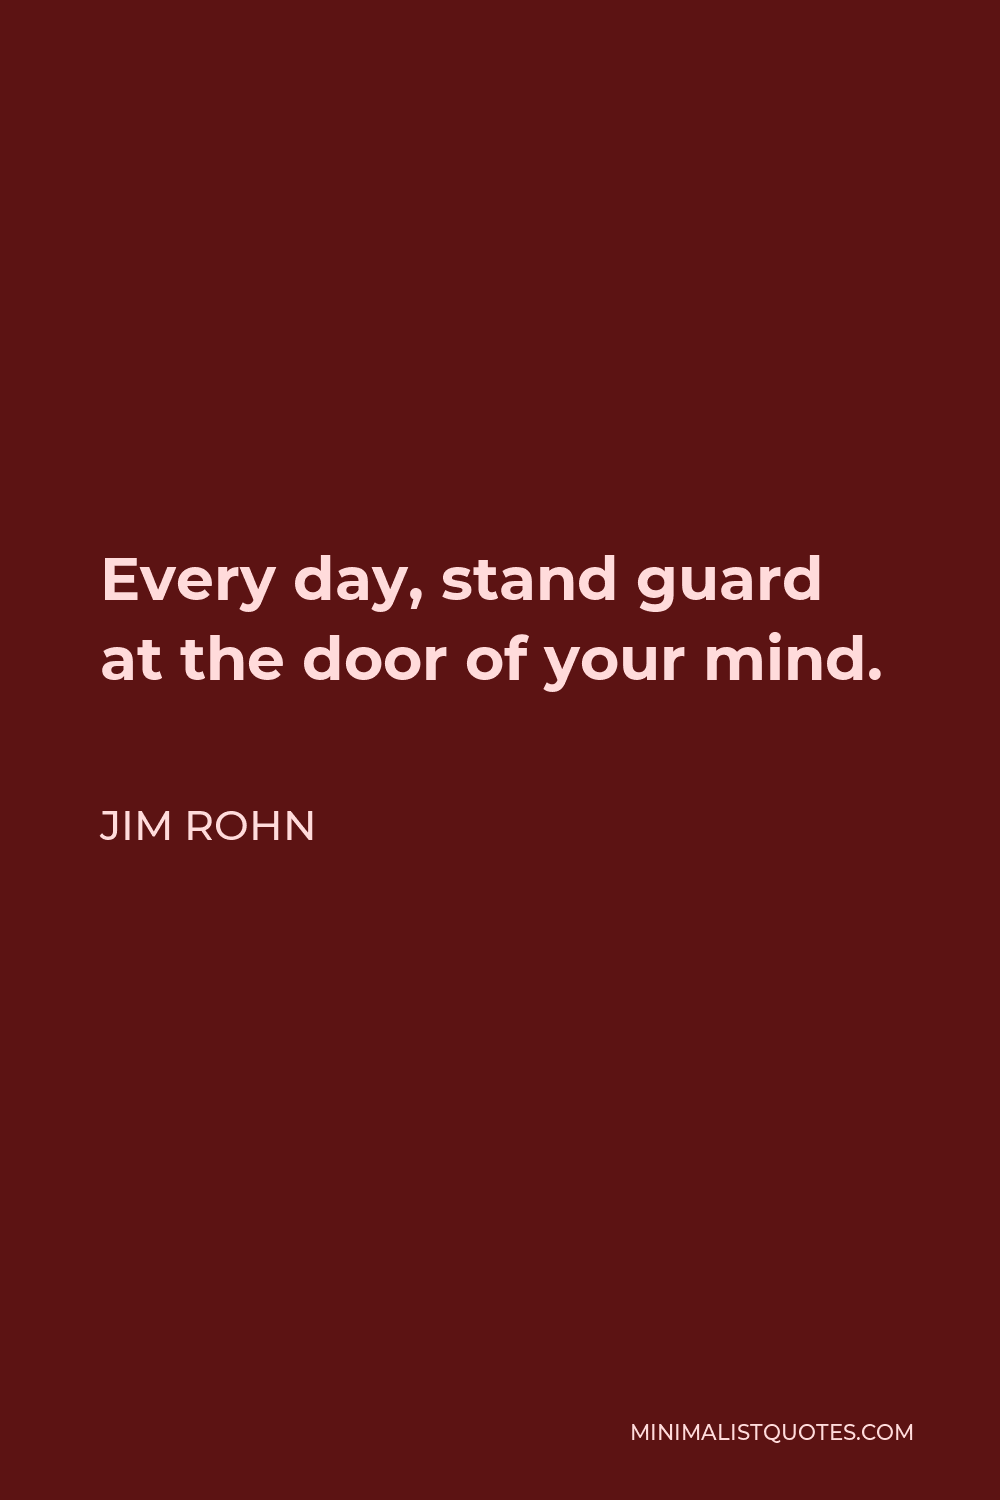 Jim Rohn Quote - Every day, stand guard at the door of your mind.